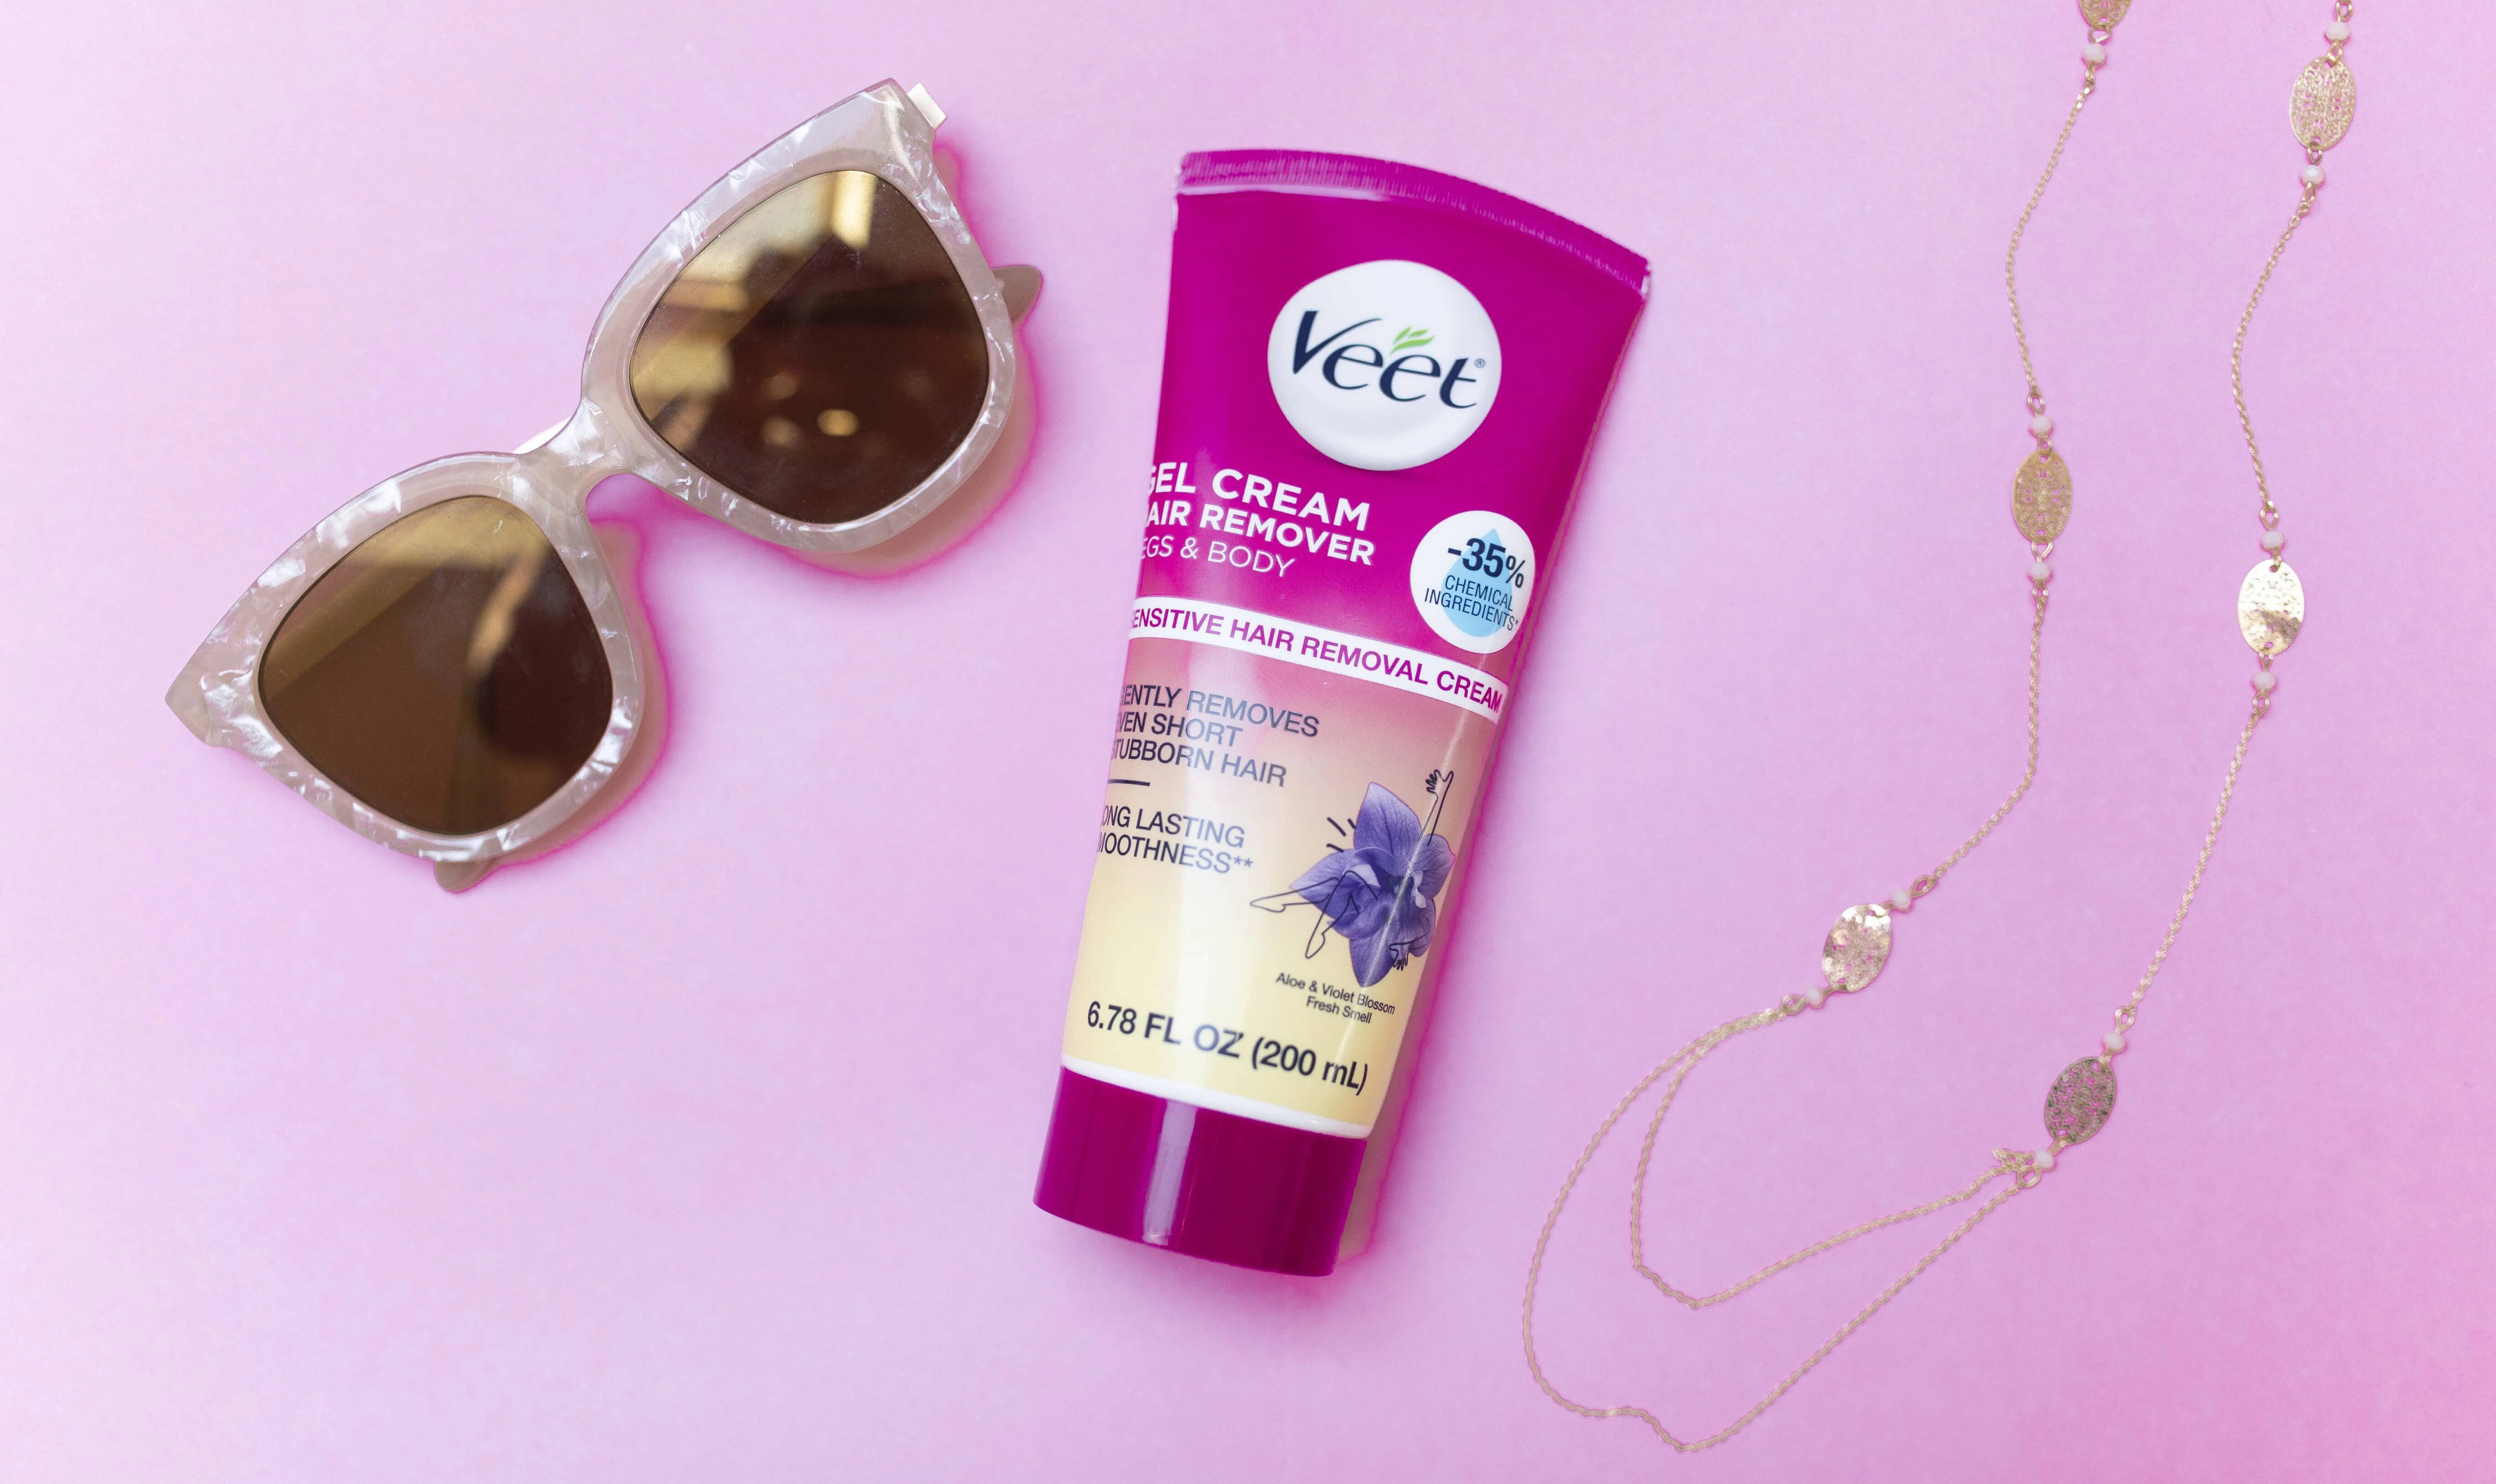 Where To Buy Veet Hair Removal Cream